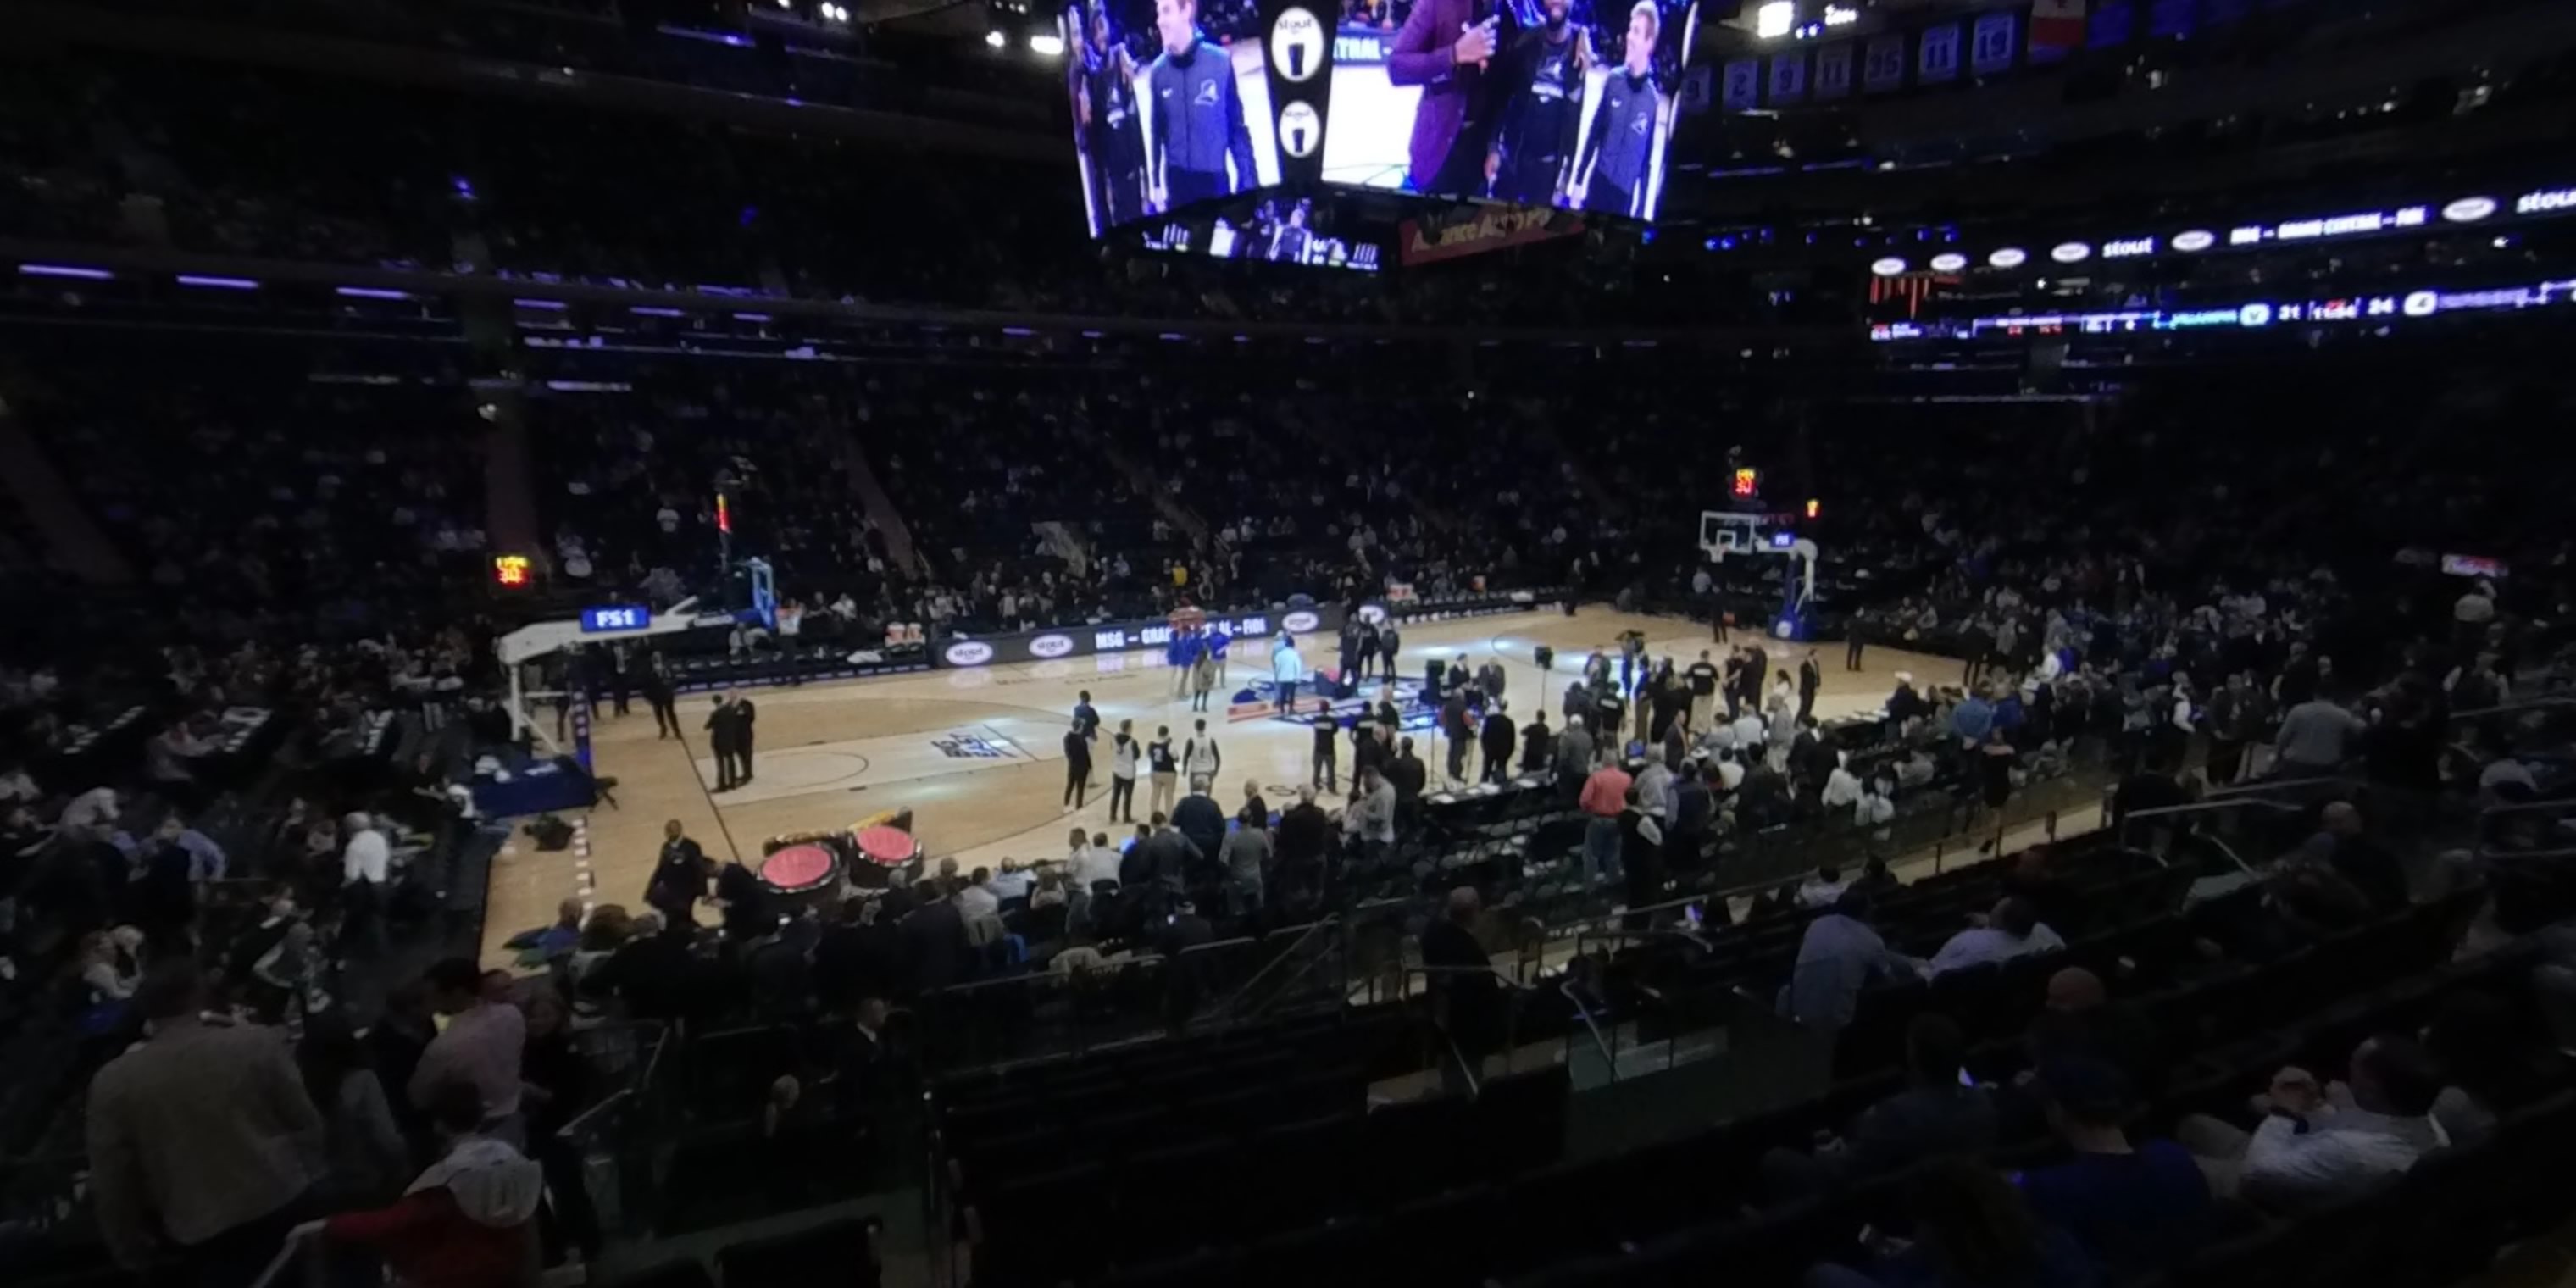 section 115 panoramic seat view  for basketball - madison square garden